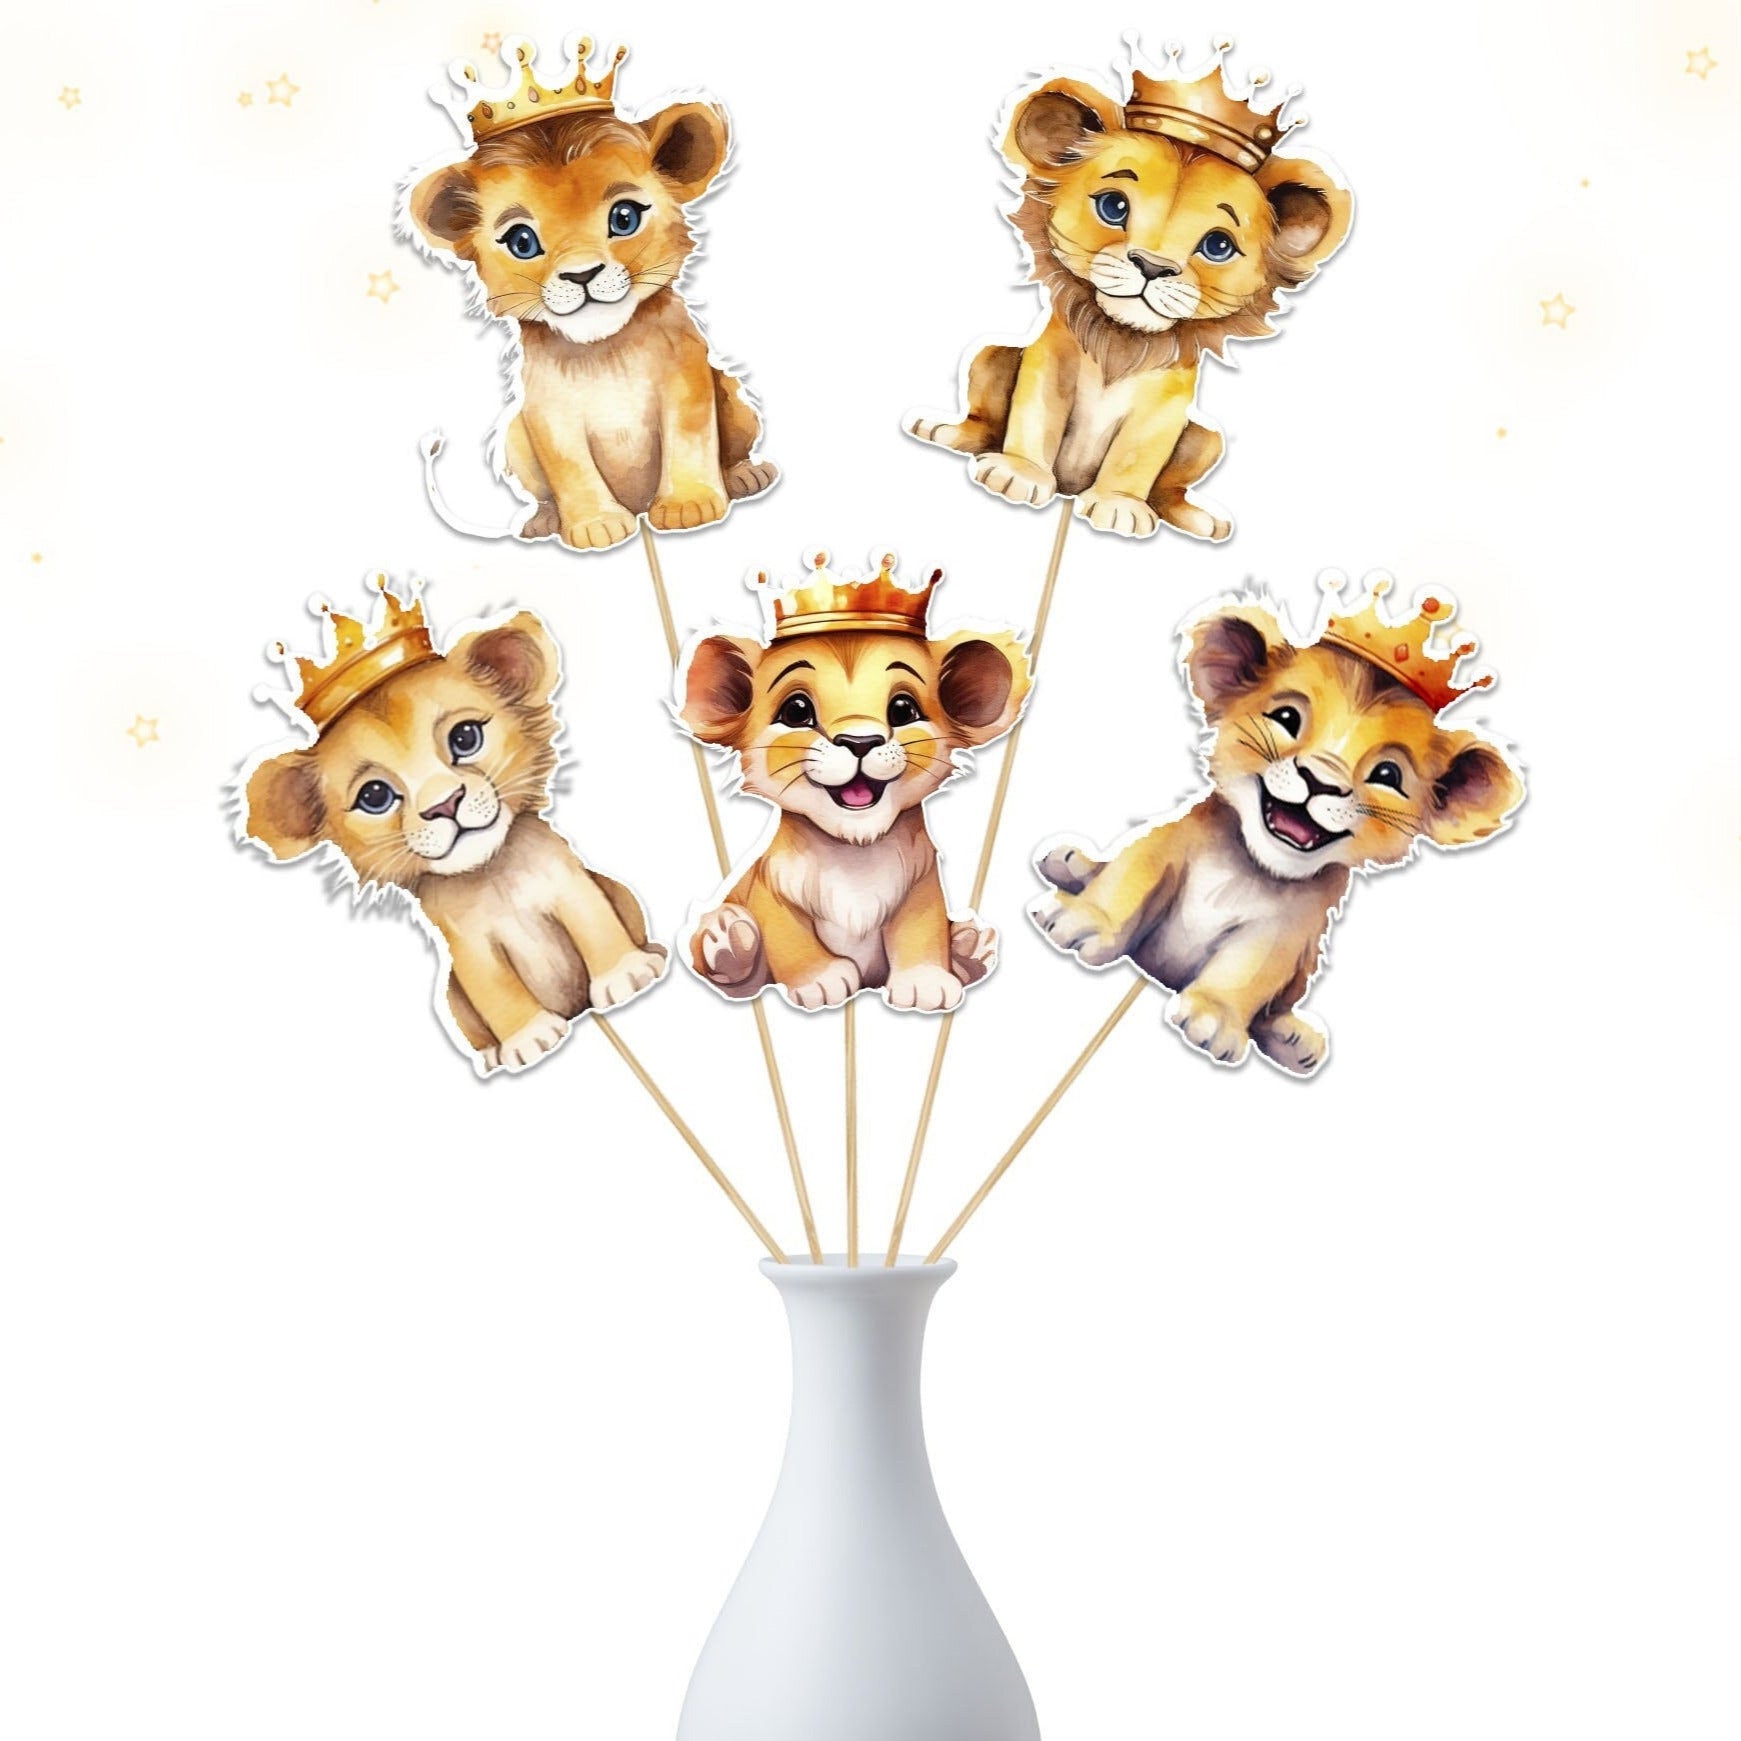 5-Piece Lion Centerpiece  - Perfect for Birthday and Baby Shower Decorations